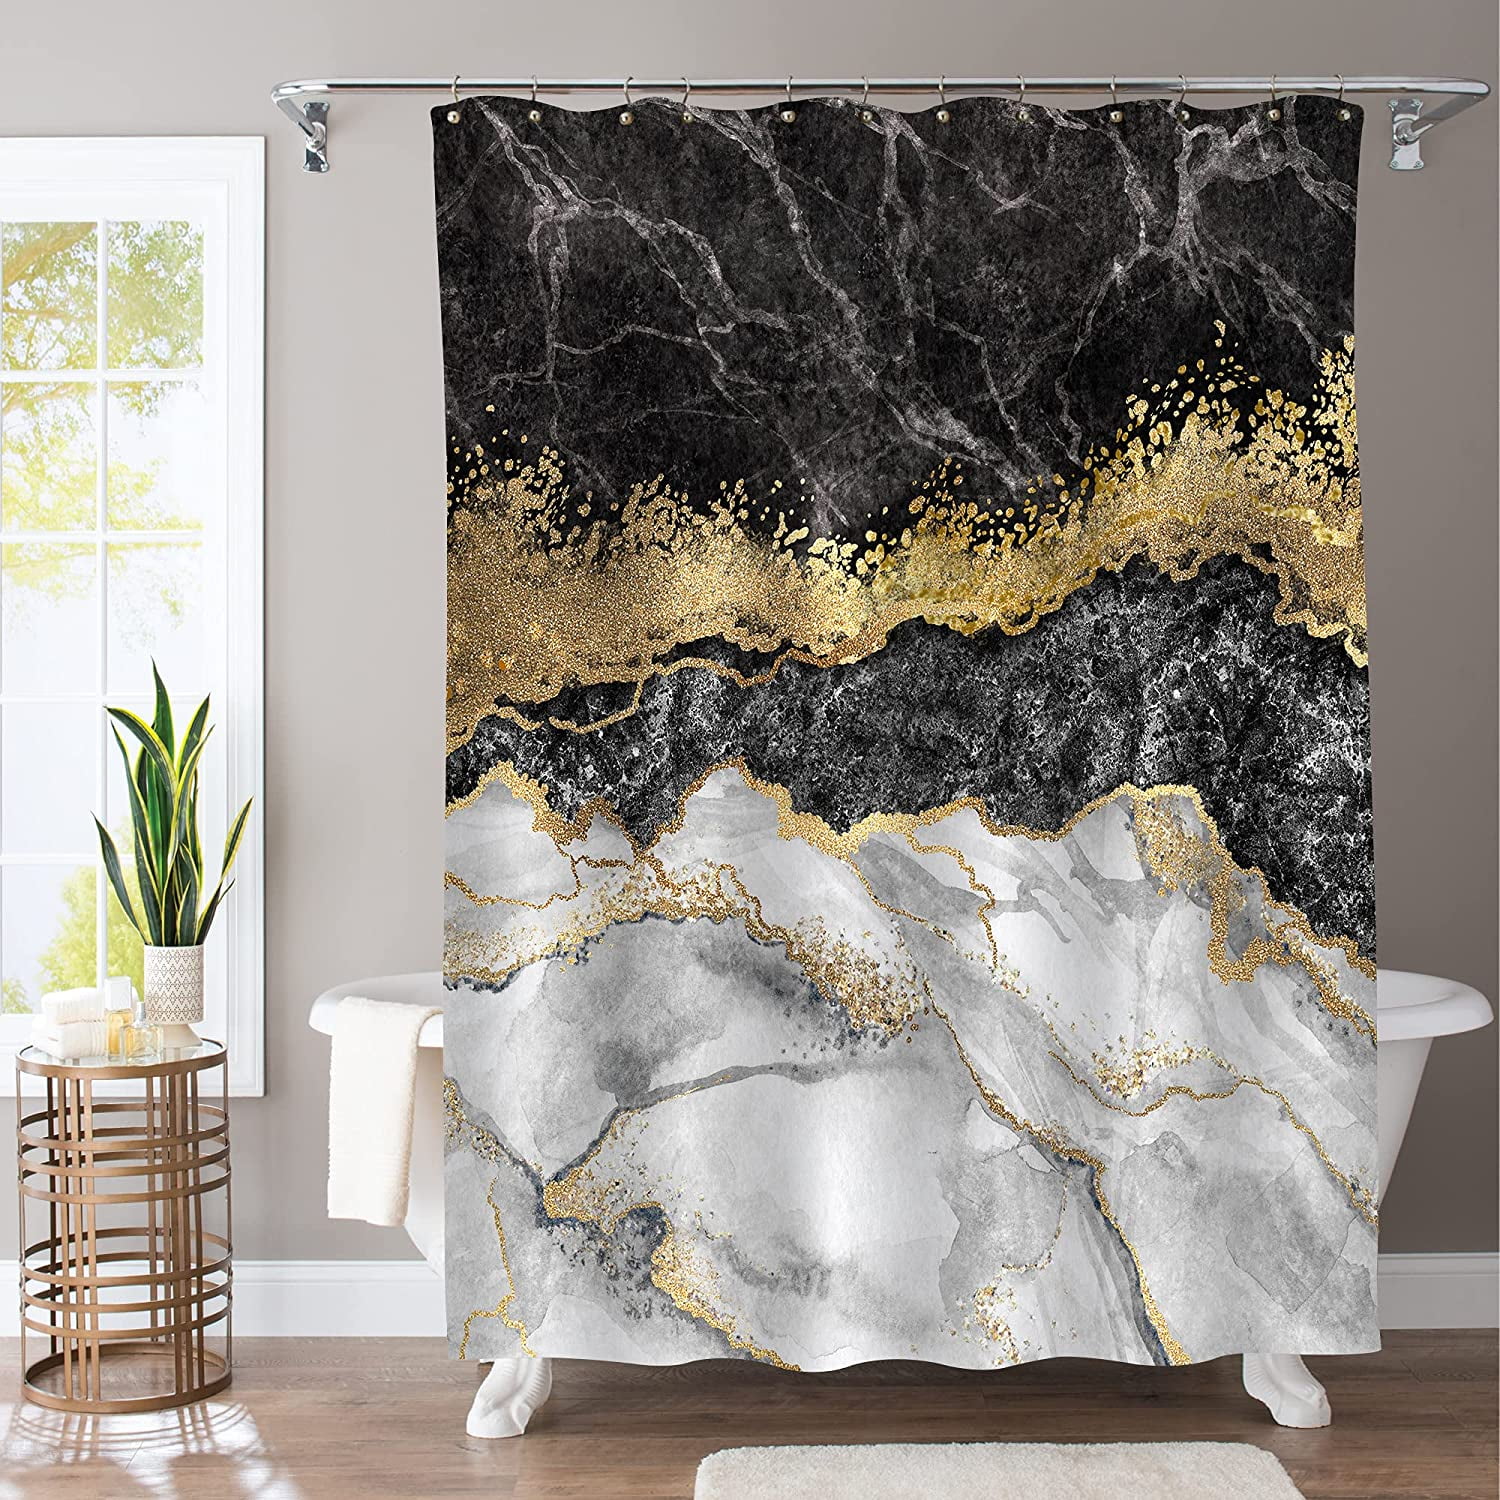 Black and White Marble Surface Fabric Shower Curtain Set Bathroom Accessories 